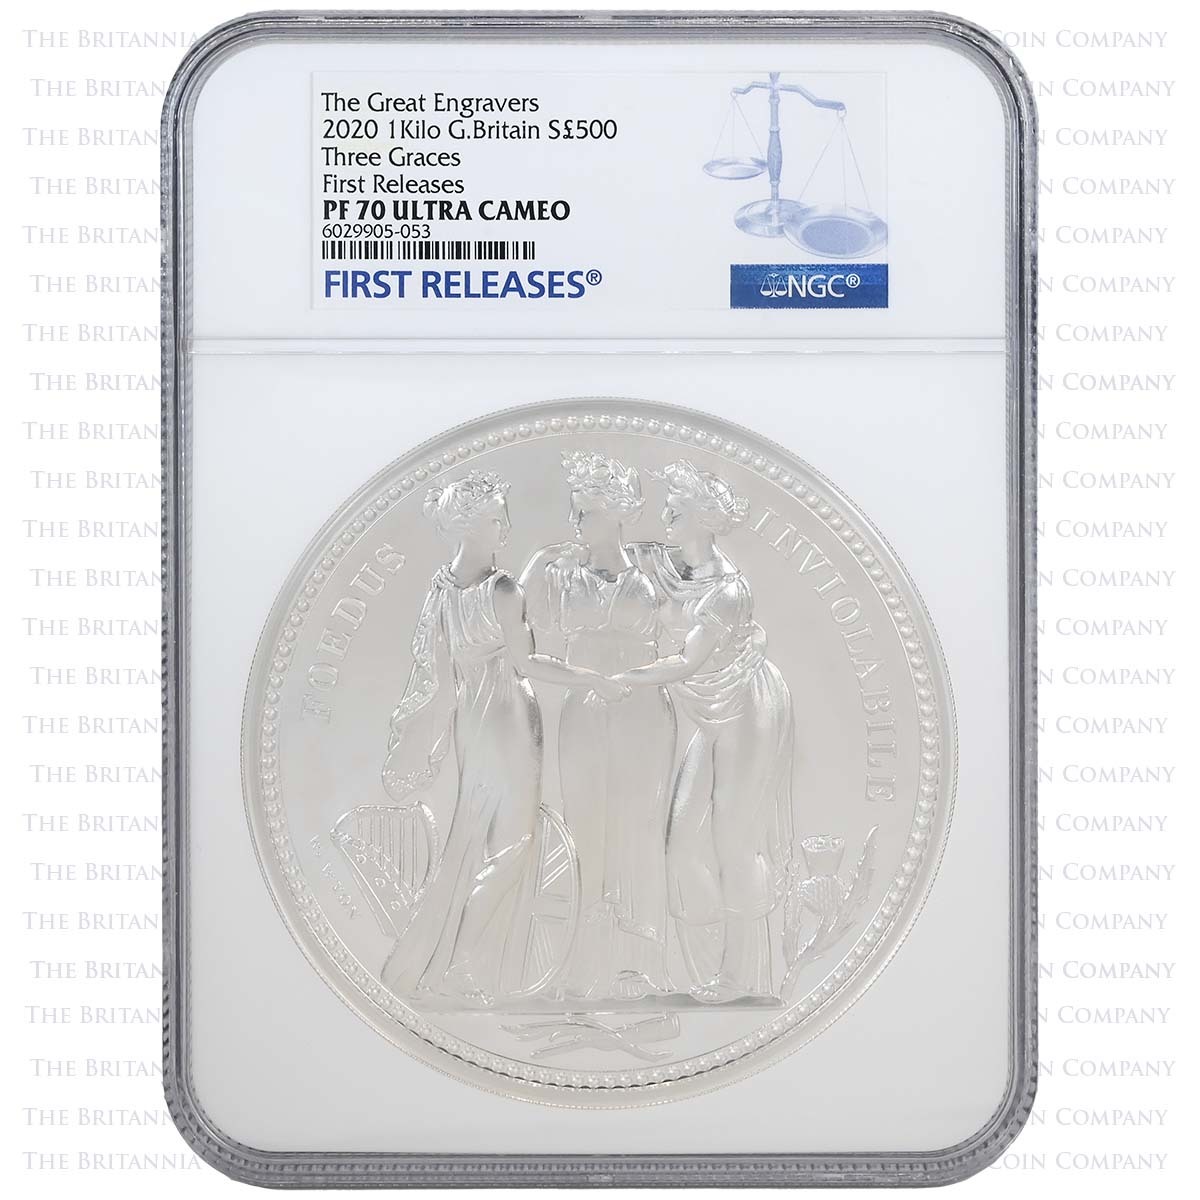 UK20WWKS 2020 Three Graces 1 Kilo Silver Proof PF 70 First Releases